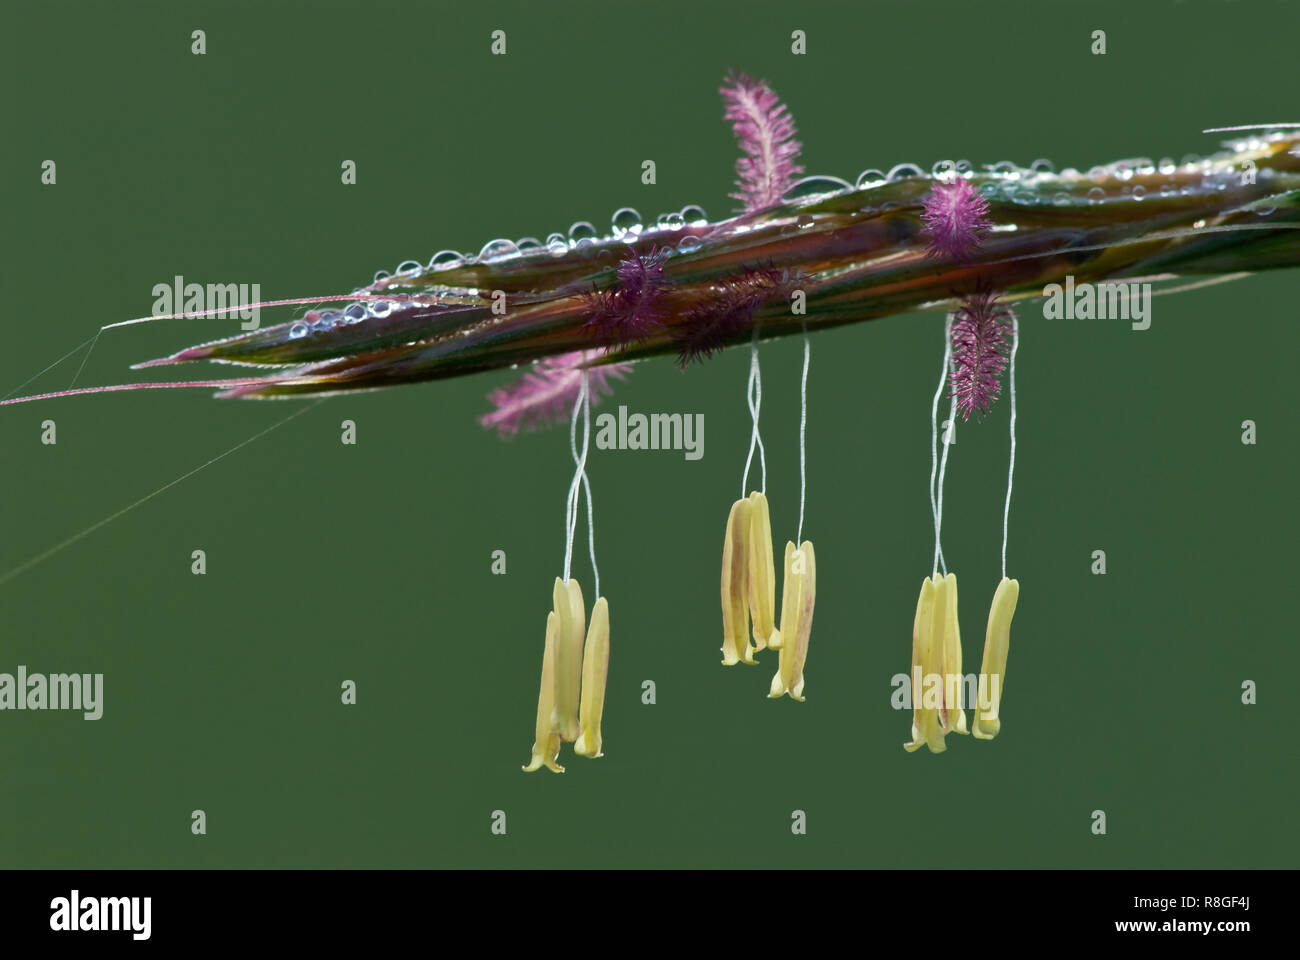 Dew-covered flowers of big bluestem grass (Andropogon gerardii), showing yellow anthers (male) dangling beneath magenta-colored stigmas (female). Stock Photo